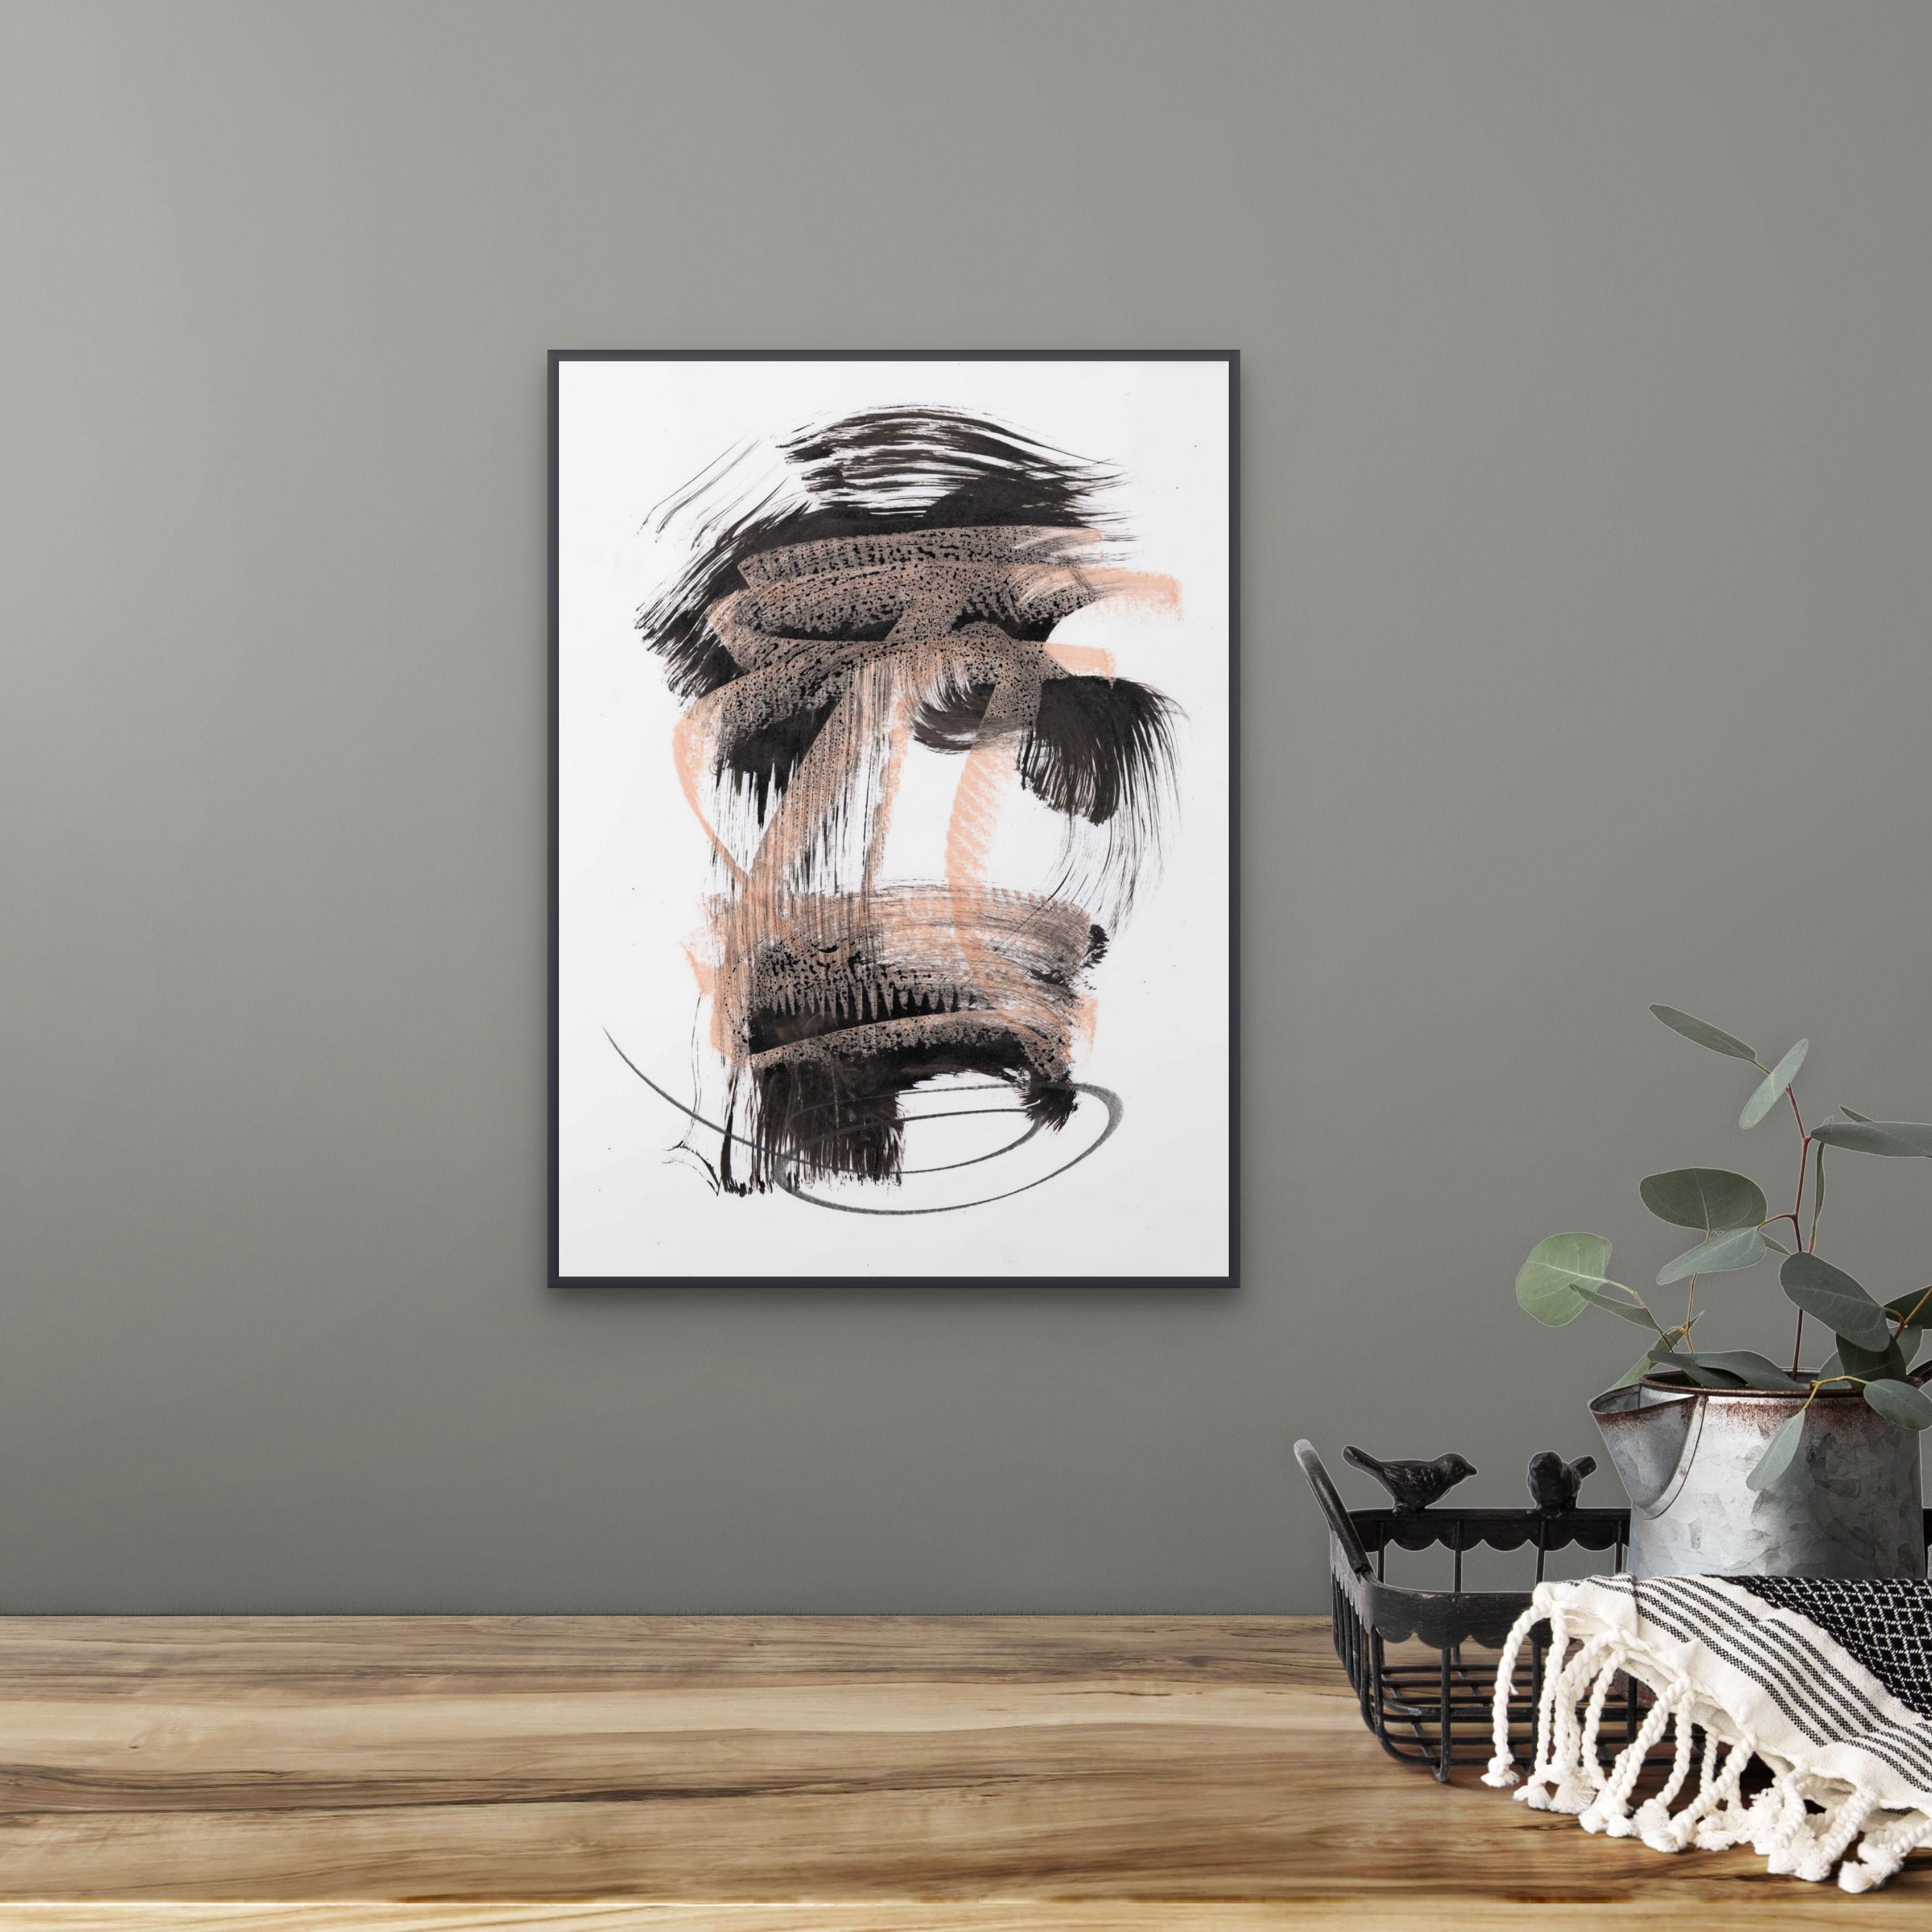 This calligraphic abstract drawing is made with Chinese ink and pastel on heavy white paper. Looking at it you can feel the freshness of instant impulse and the charge of cheerful energy! II was inspired by the dusty pink pastel color. It is